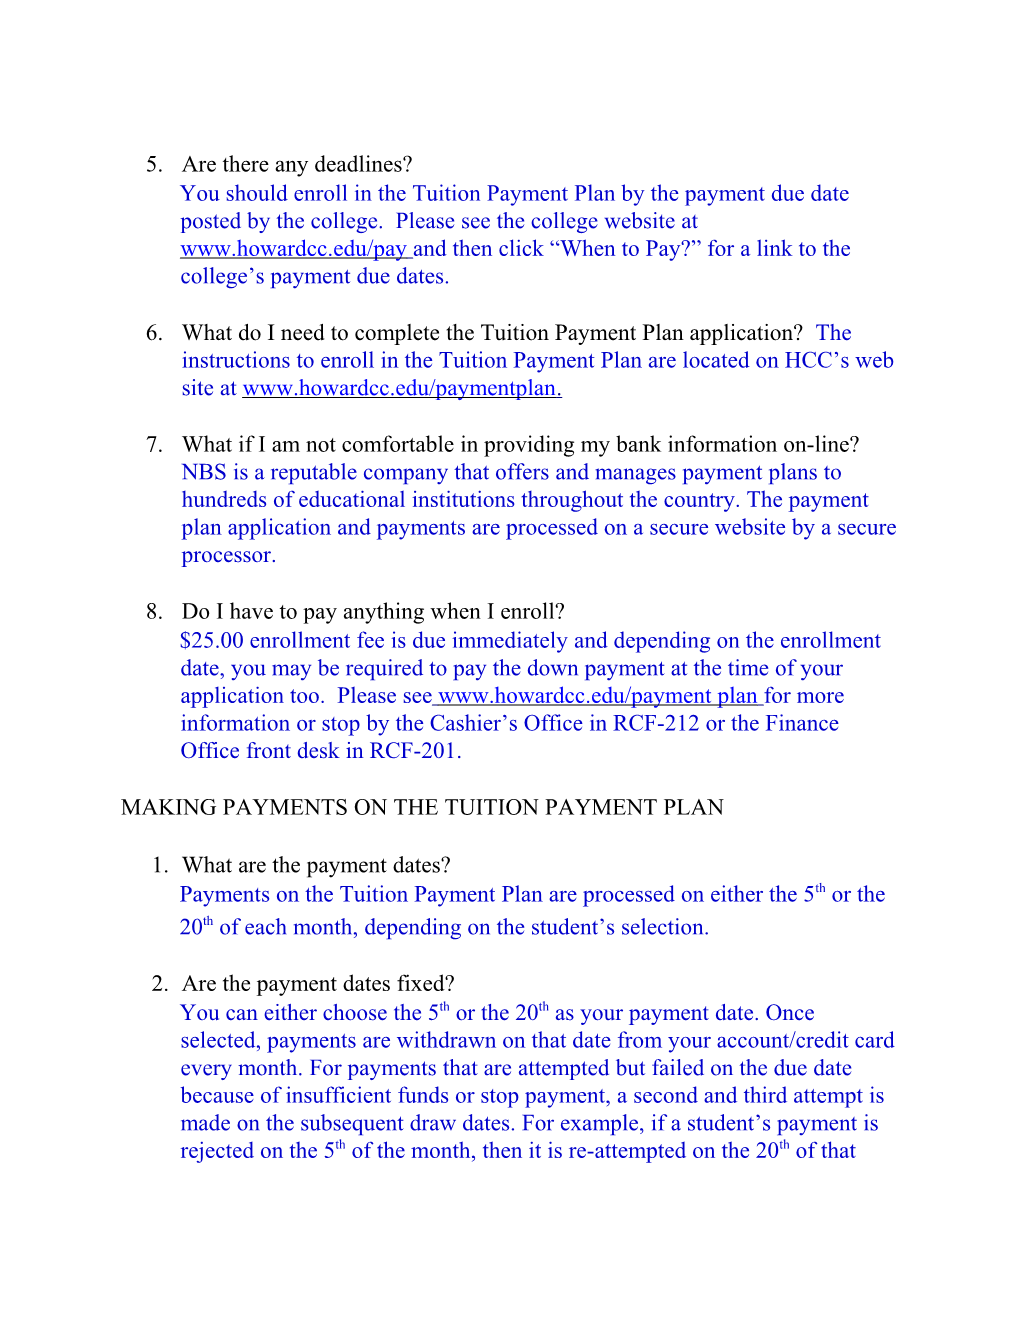 Tuition Payment Plan Frequently Asked Questions